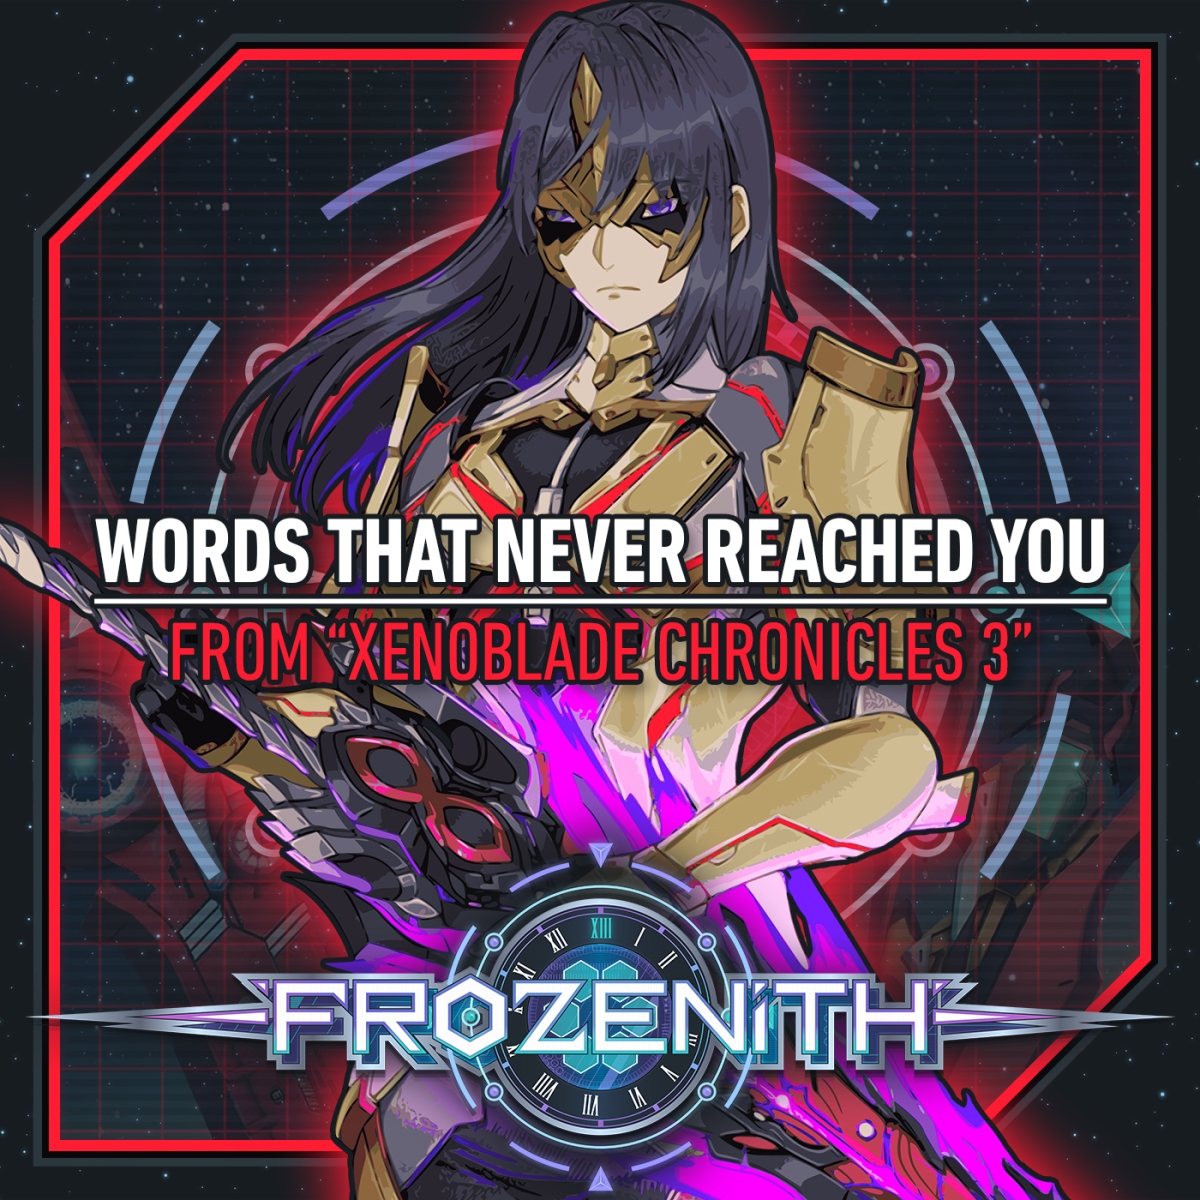 New Remix: Words That Never Reached You (from “Xenoblade Chronicles 3”)